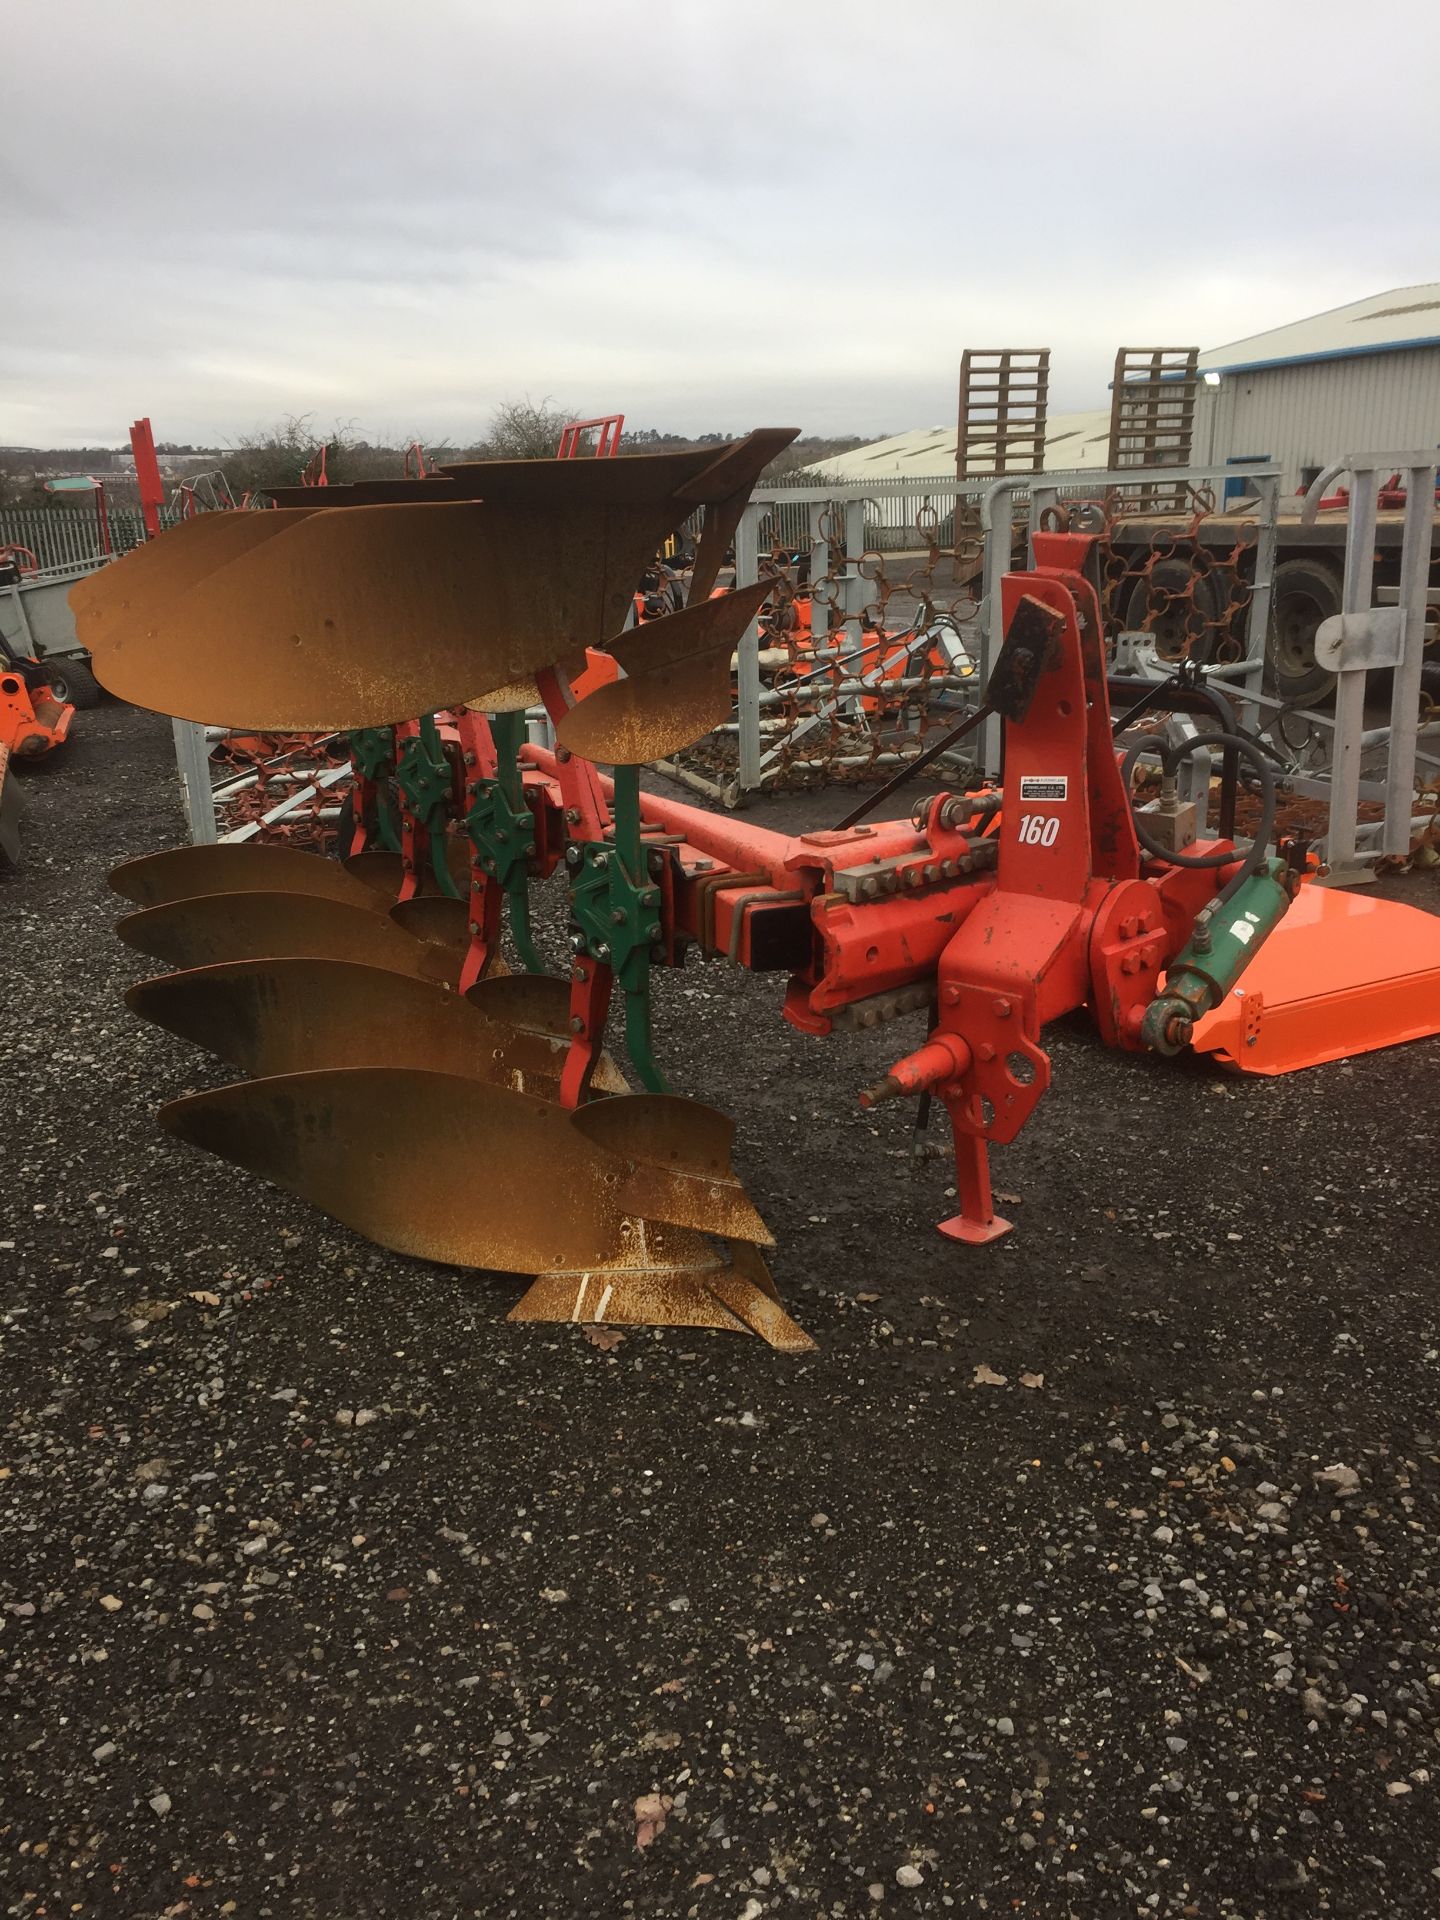 Kverneland VD85/160 4 furrow reversible plough with 160 headstock-sheer bolt type, Serial No. 381 ( - Image 2 of 3